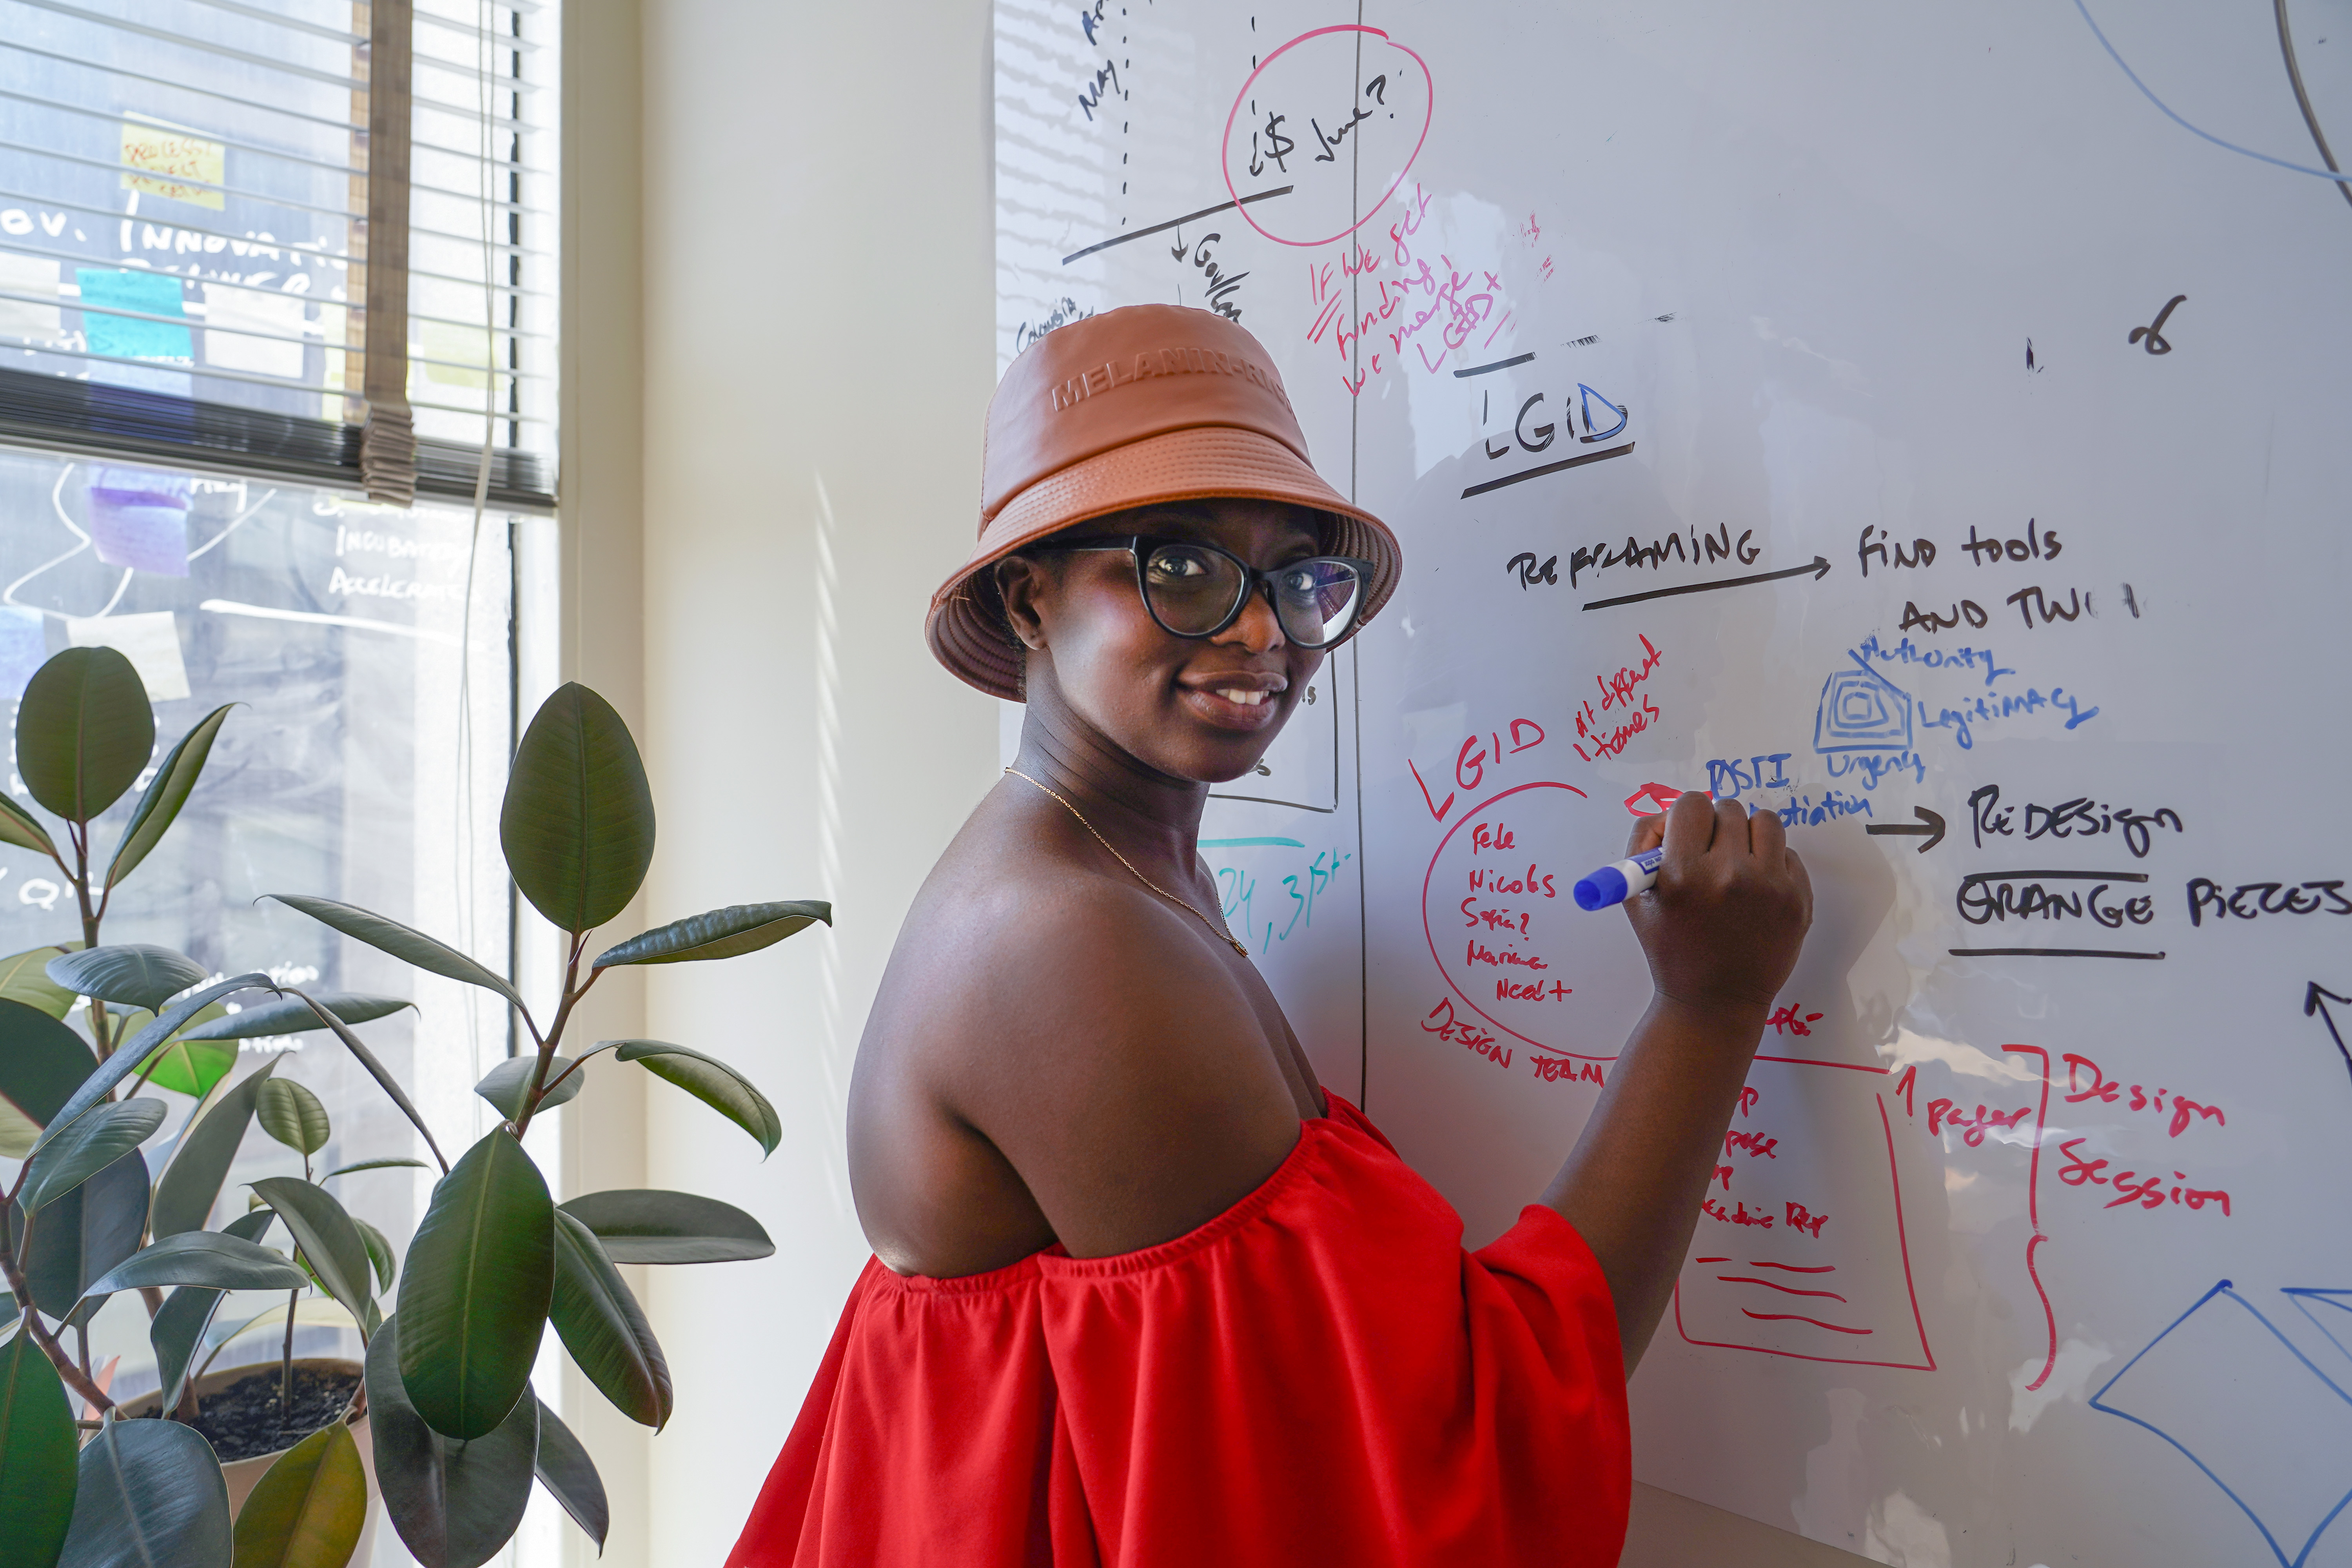 In the nexus of design, governance, and innovation, Mariama N’Diaye’s goal is to empower mid-level government managers and uplift marginalized communities by harnessing the transformative power of design thinking.